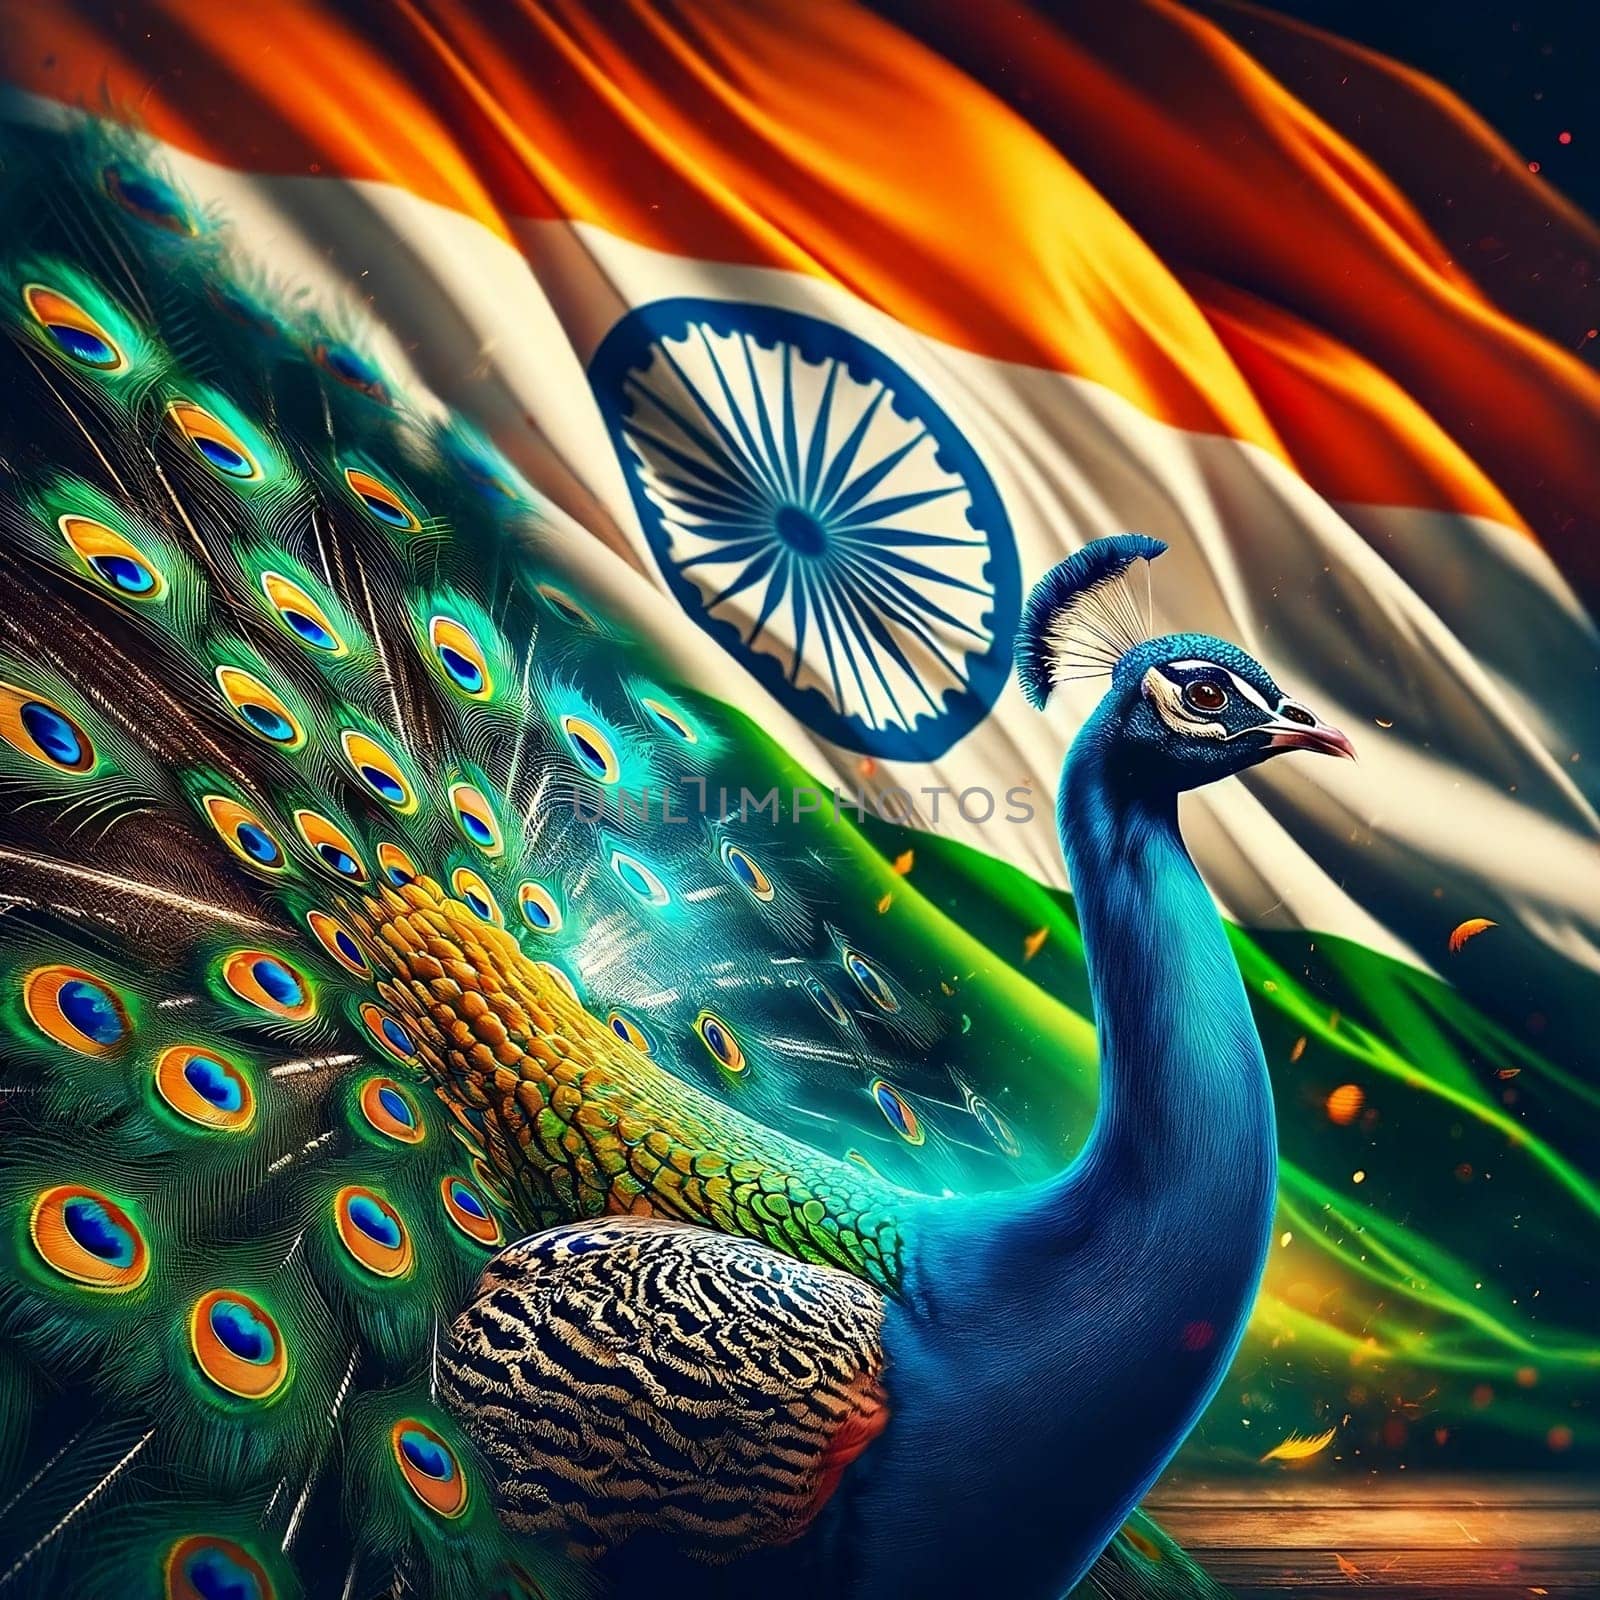 National Bird of India, The Indian peacock, stands in front of an Indian flag. High quality photo